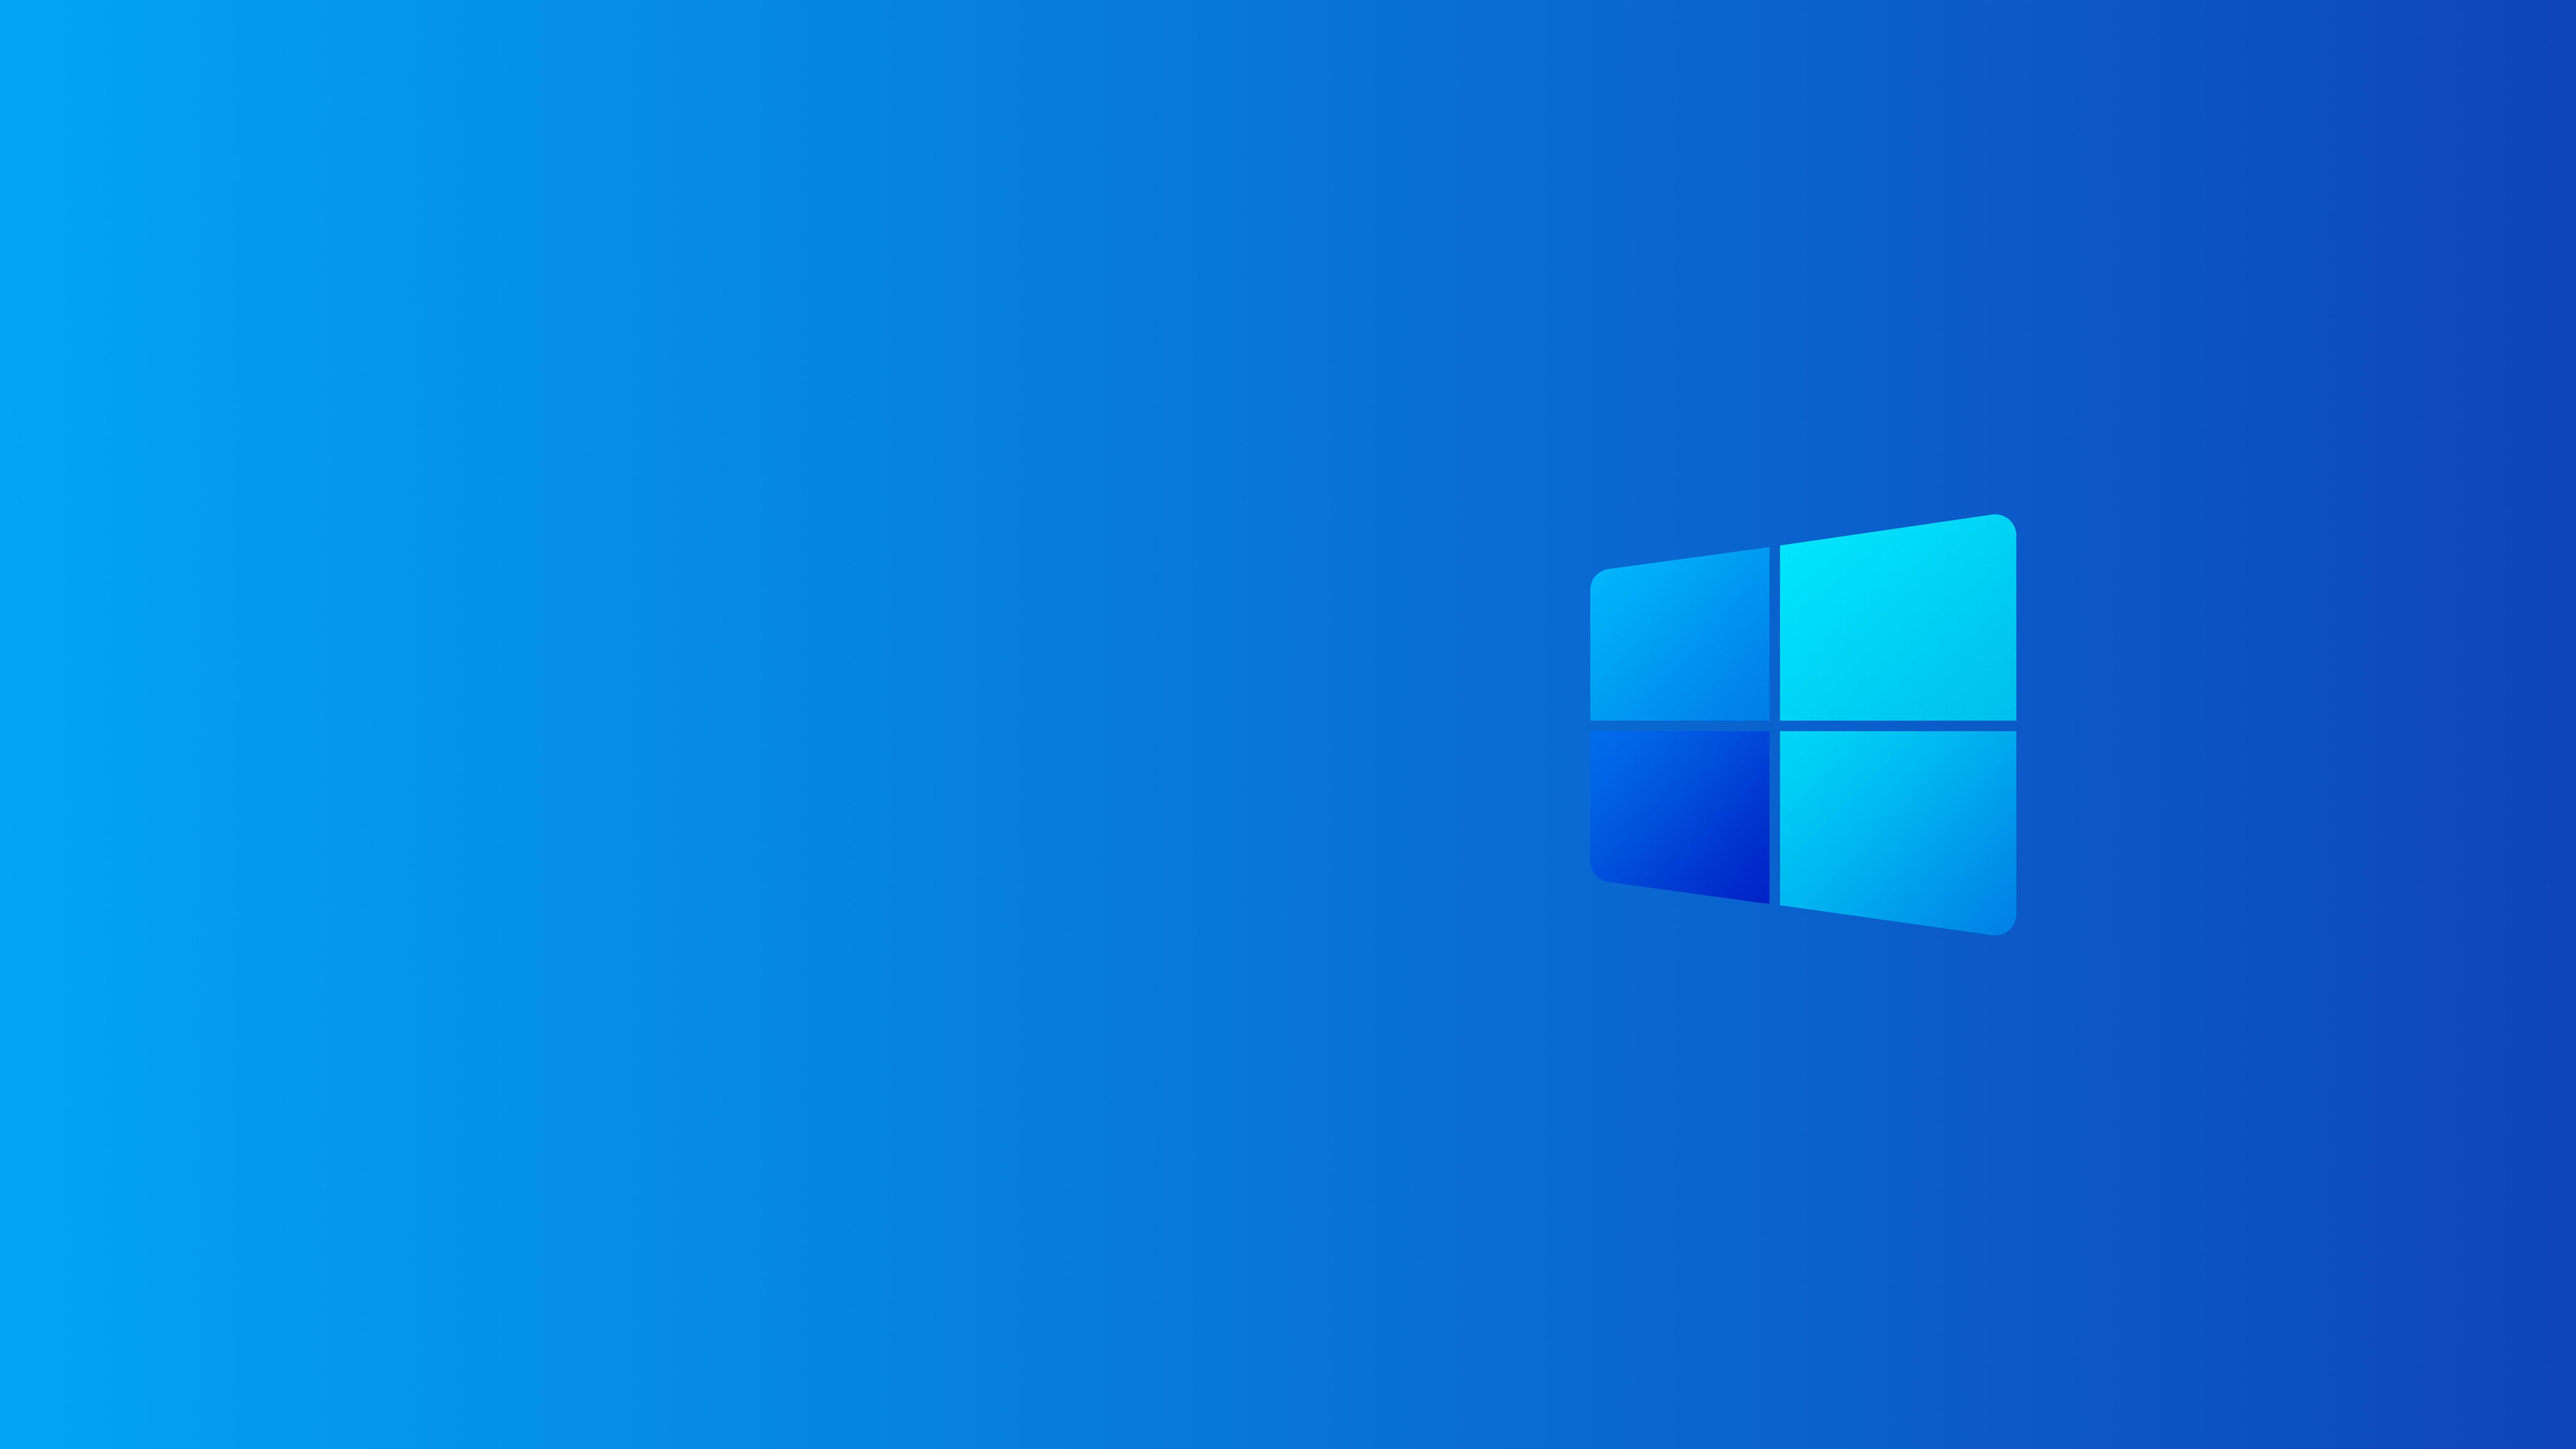 I made two 8K Windows 10X wallpaper cus I thought the logo looked cool lol (GDrive link under photo and in comments)